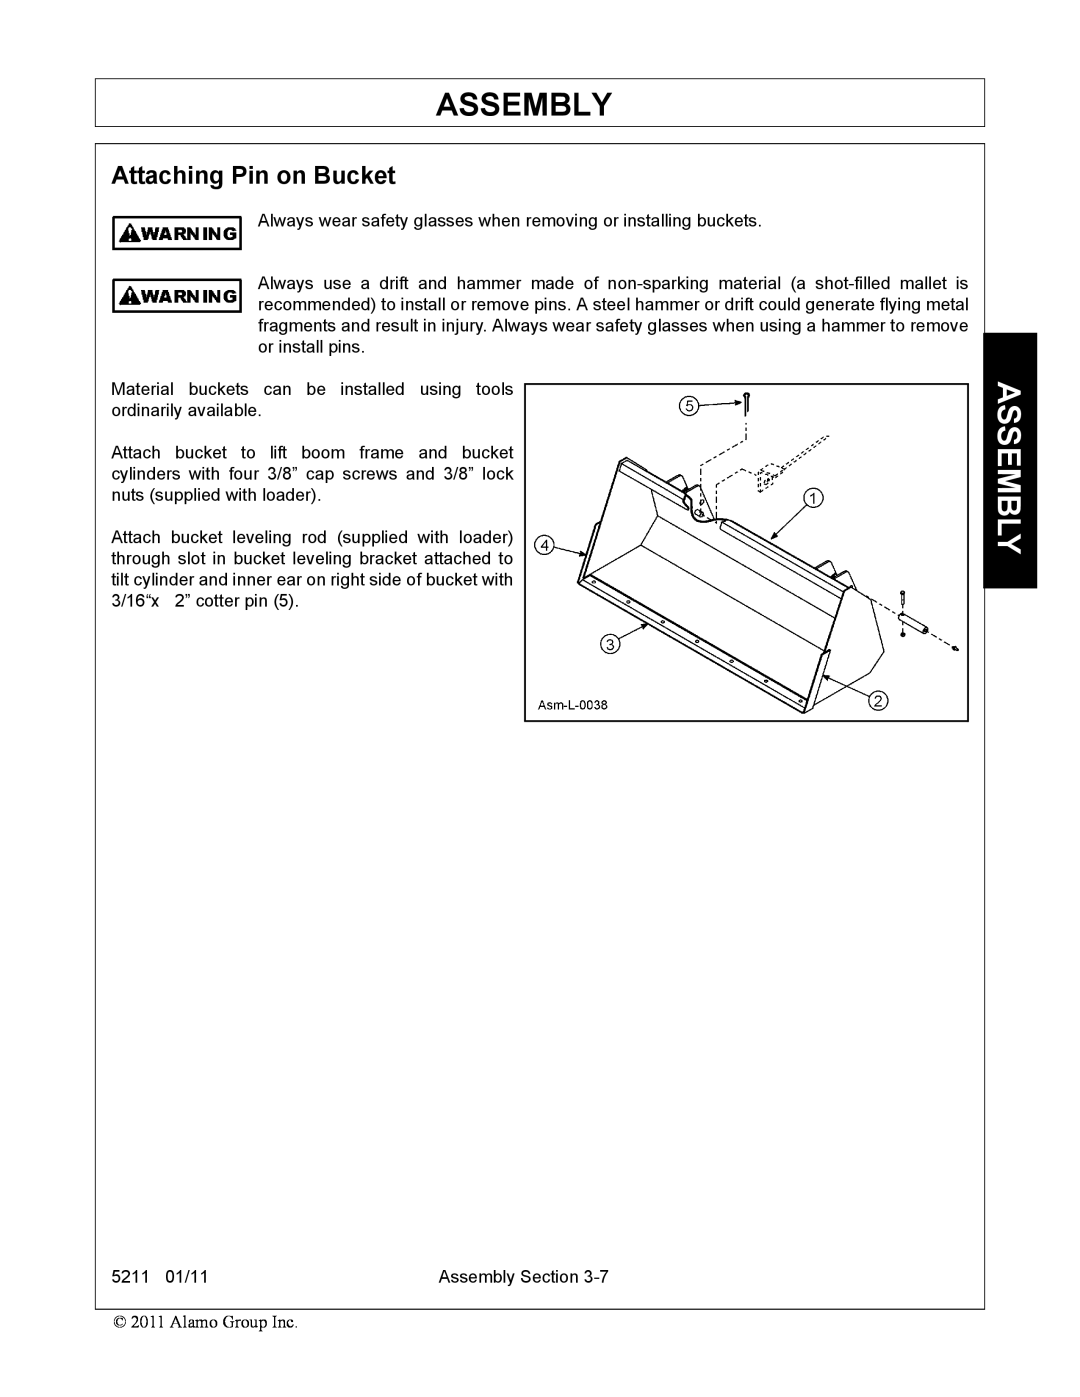 Servis-Rhino 5211 manual Assembly, Attaching Pin on Bucket 